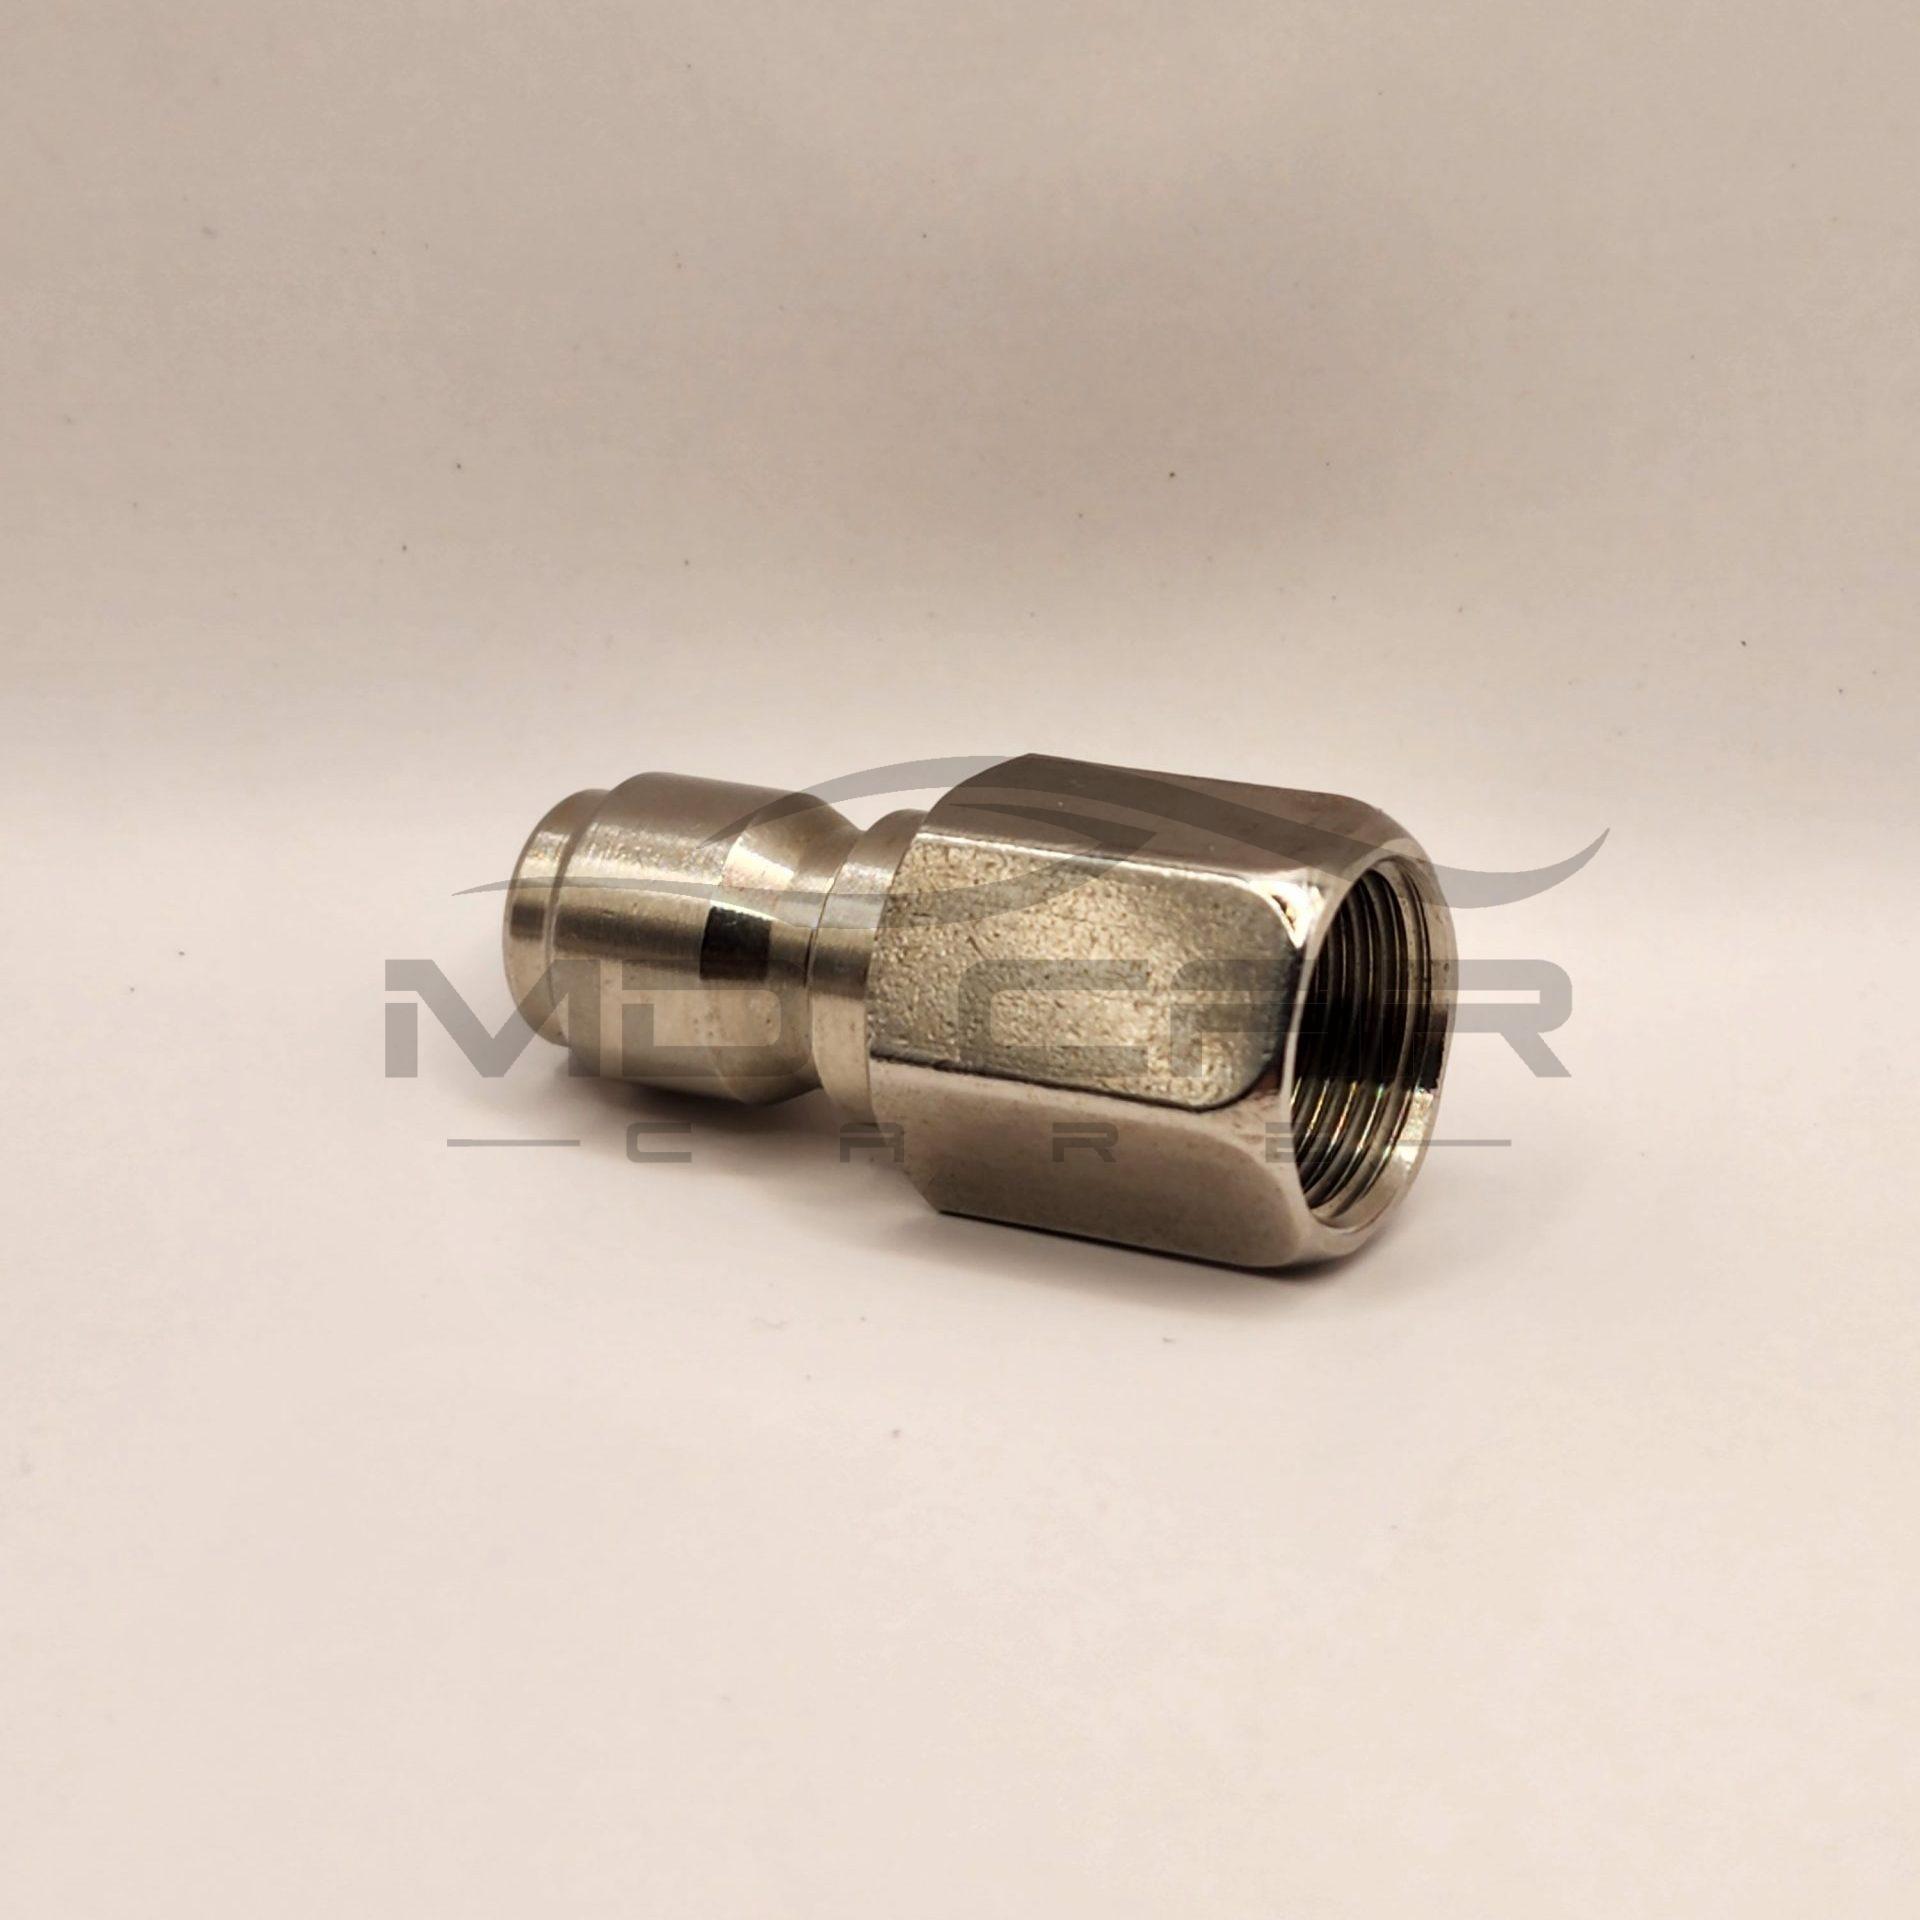 3/8" thread to 3/8" male quick connect brass